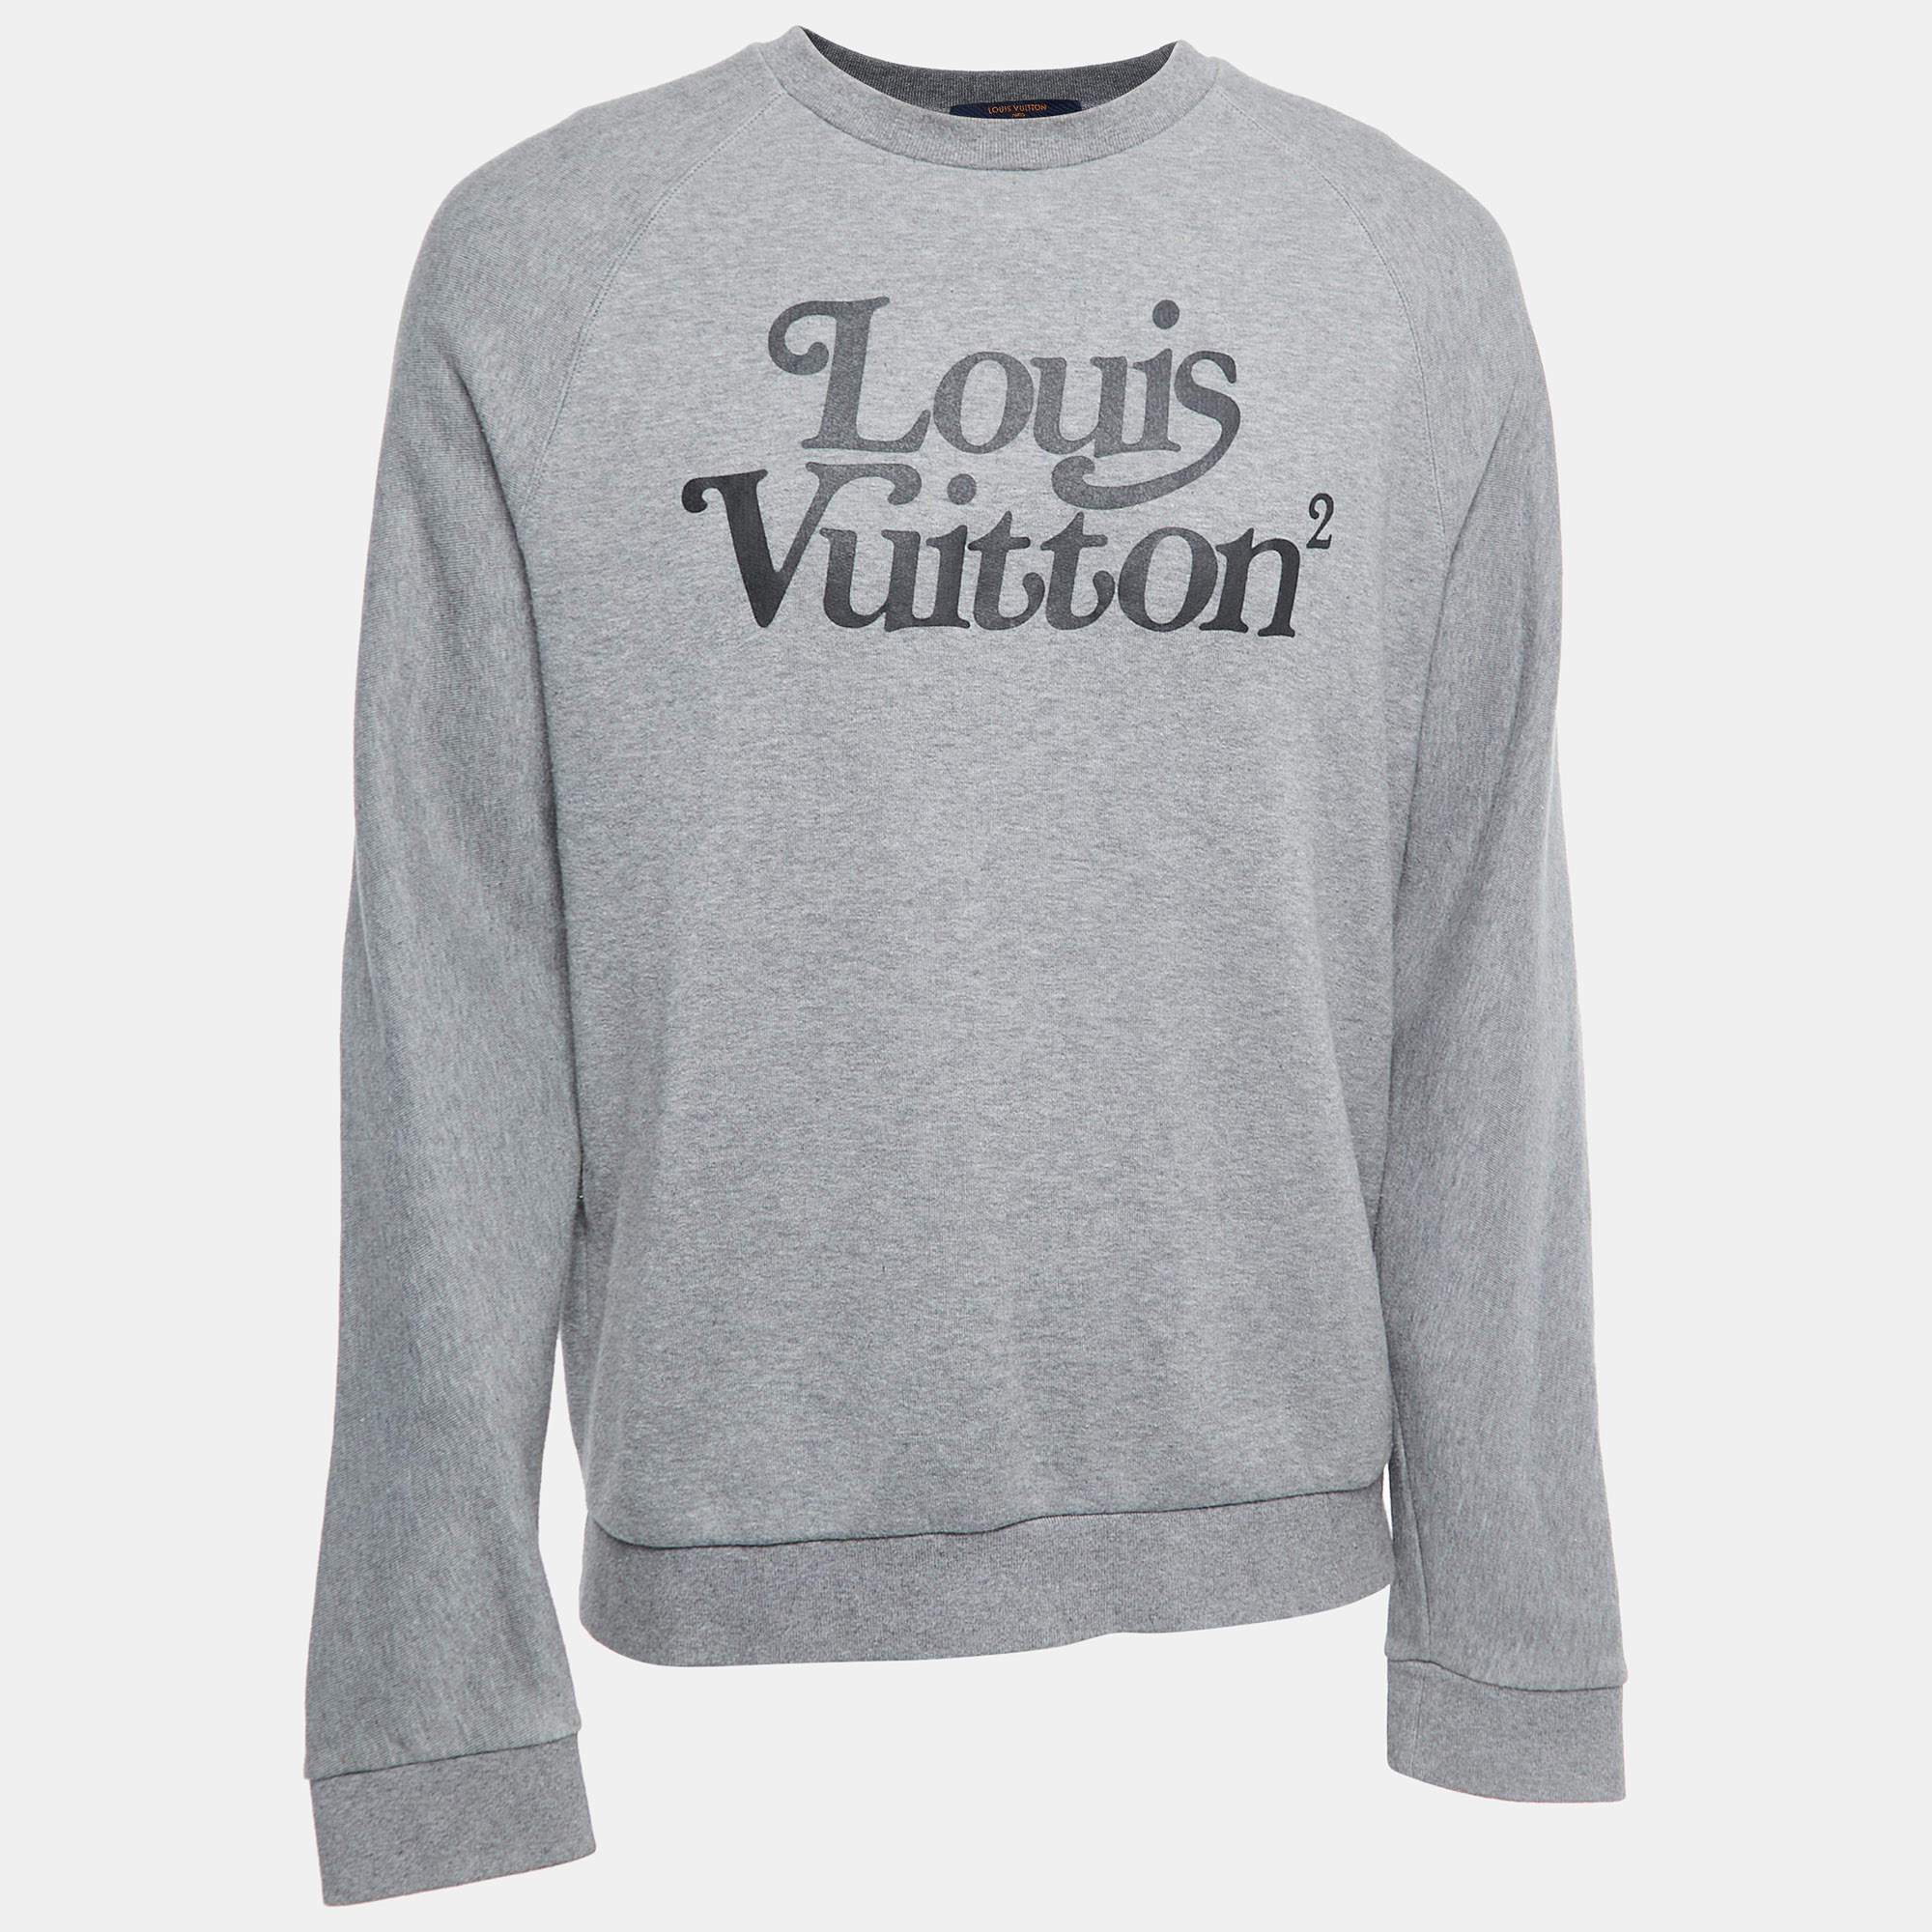 Louis Vuitton 2016 Crew Neck Pullover - Grey Sweaters, Clothing